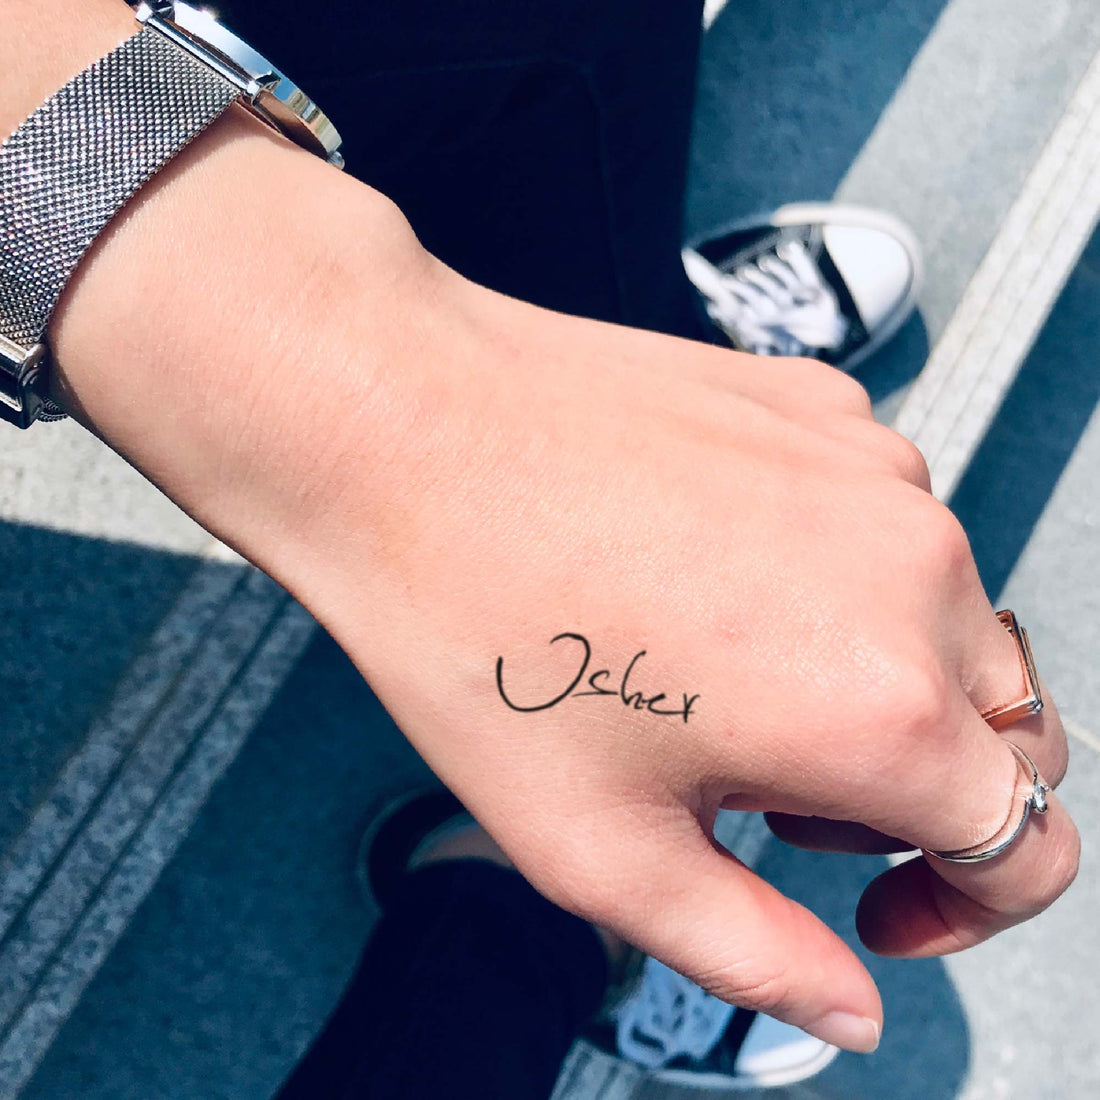 Usher custom temporary tattoo sticker design idea inspiration meanings removal arm wrist hand words font name signature calligraphy lyrics tour concert outfits merch accessory gift souvenir costumes wear dress up code